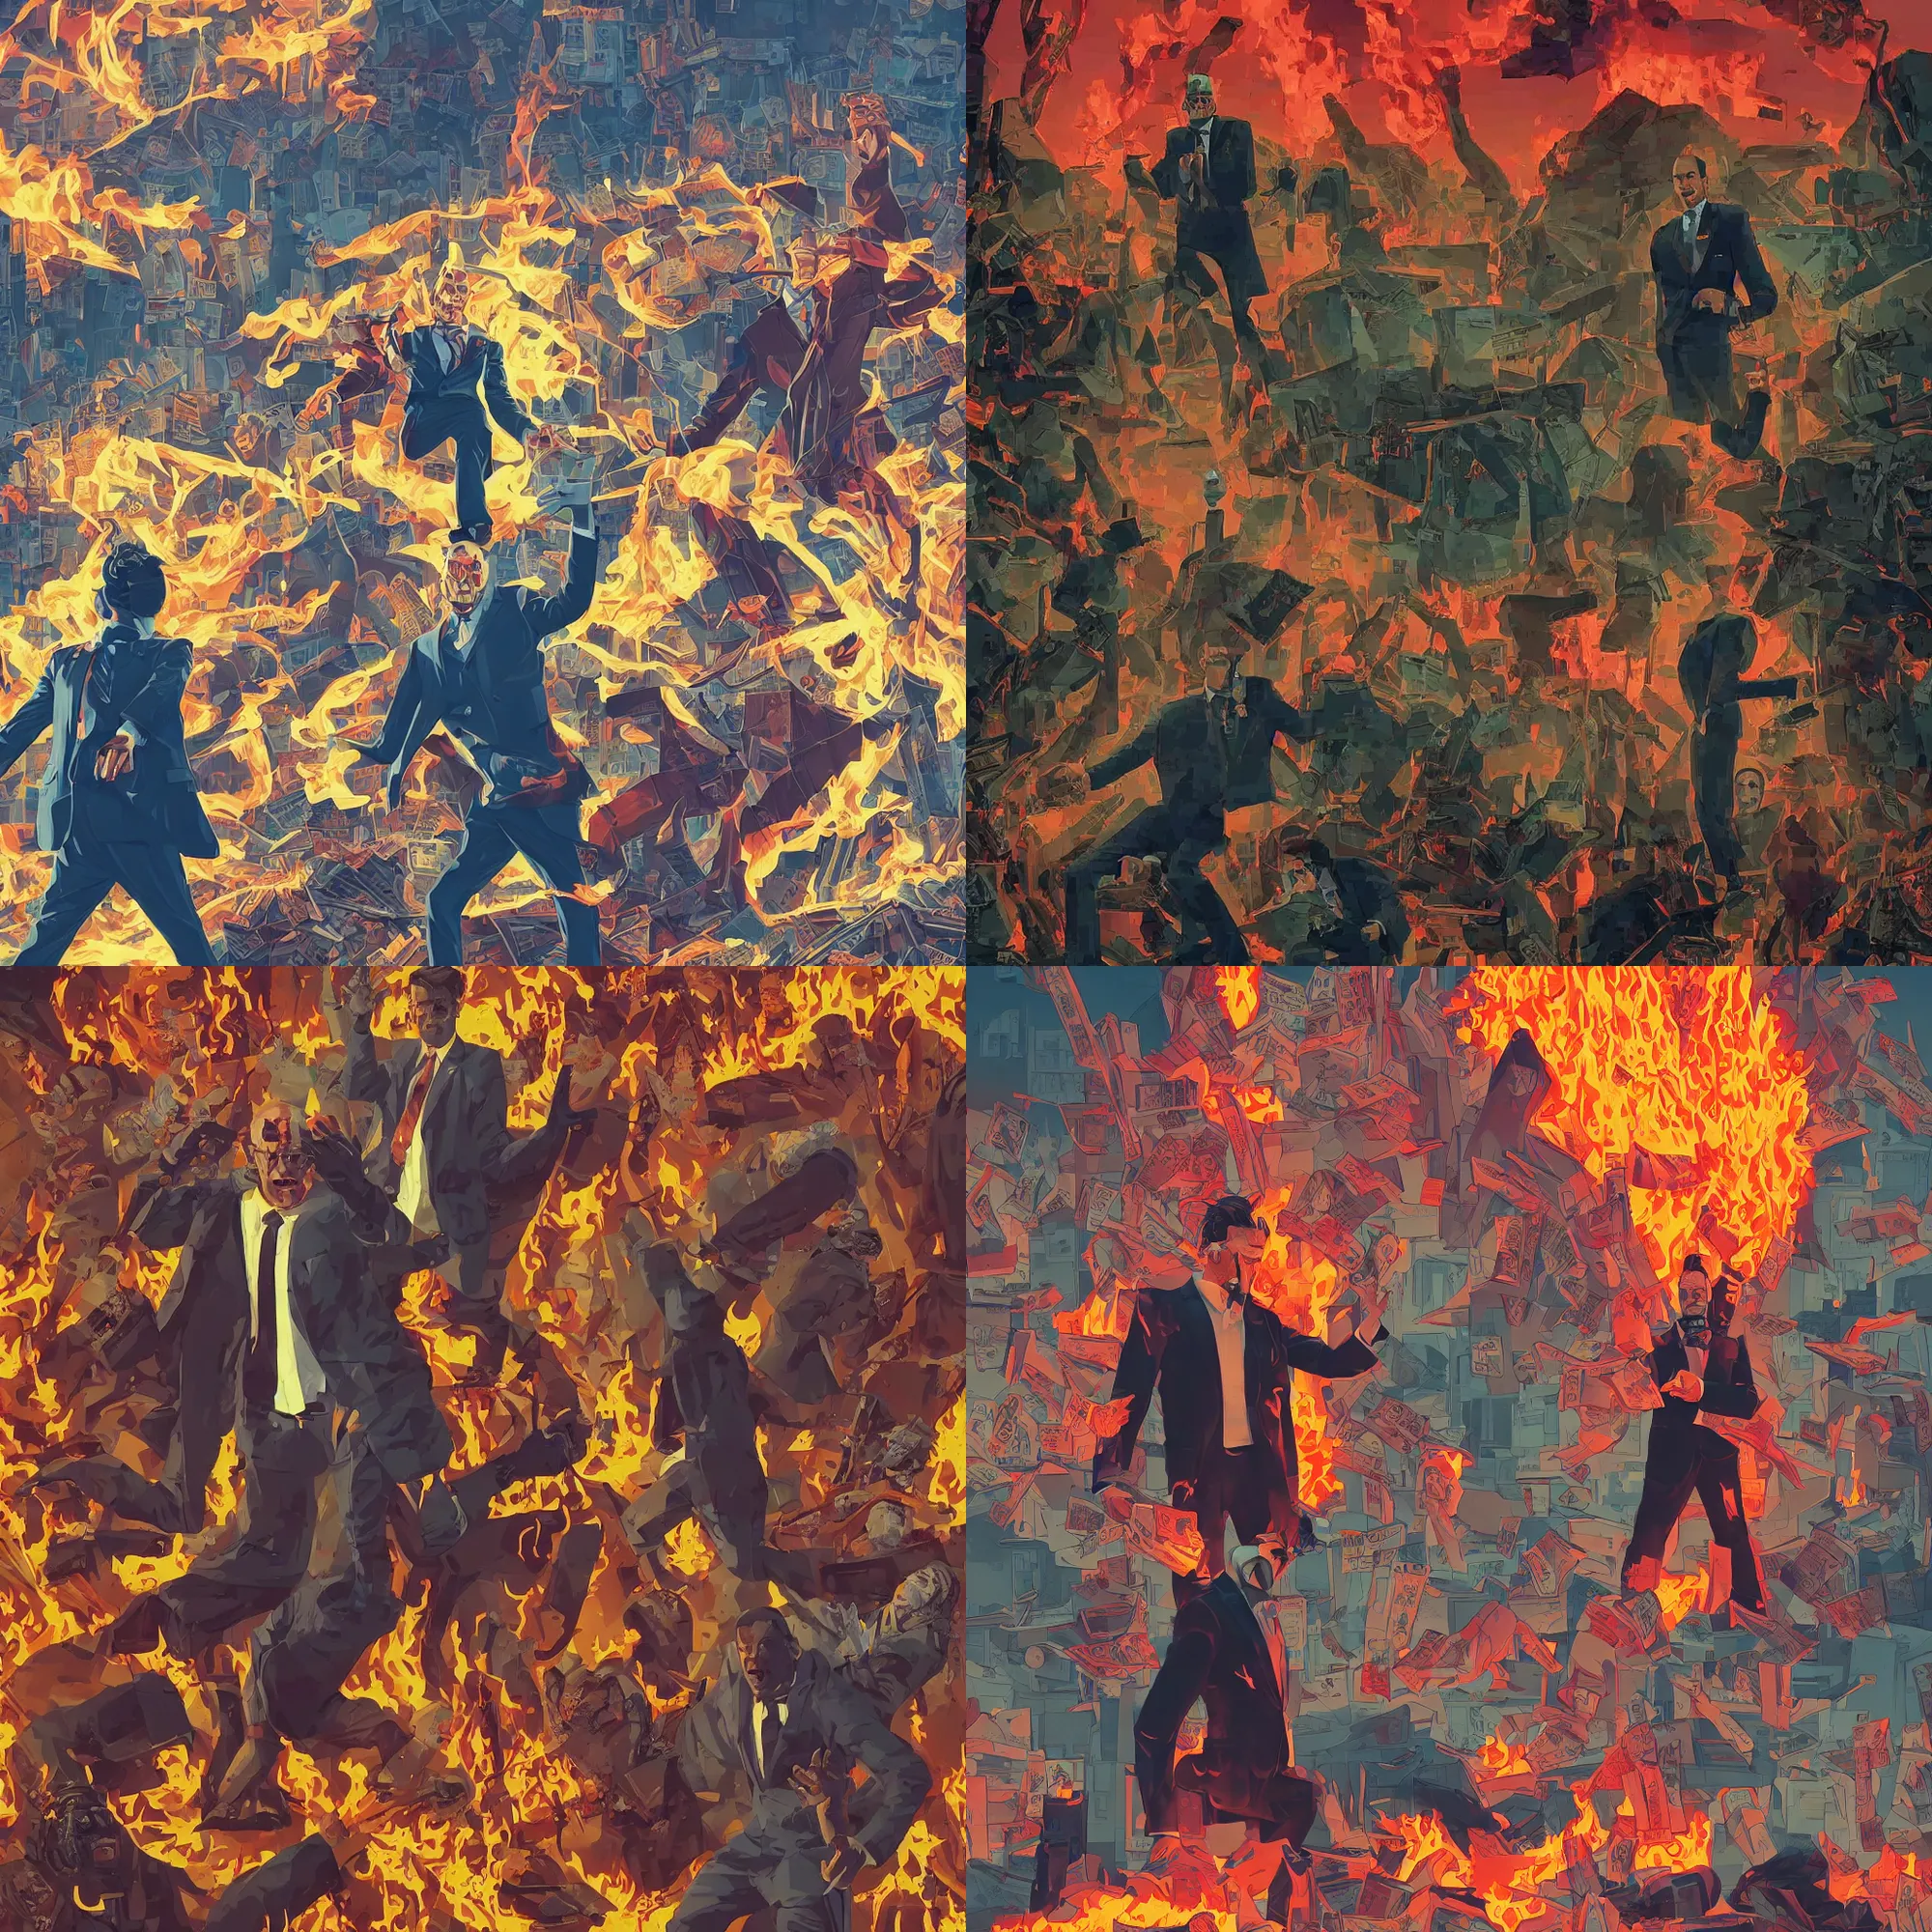 Prompt: a poster artwork of evil ambitius man in suit enjoying the destruction for money, fire, wildfire nature, Tomer Hanuka, Sam Weber, Laurent Durieux, from scene from Los bañeros mas locos del mundo, clean